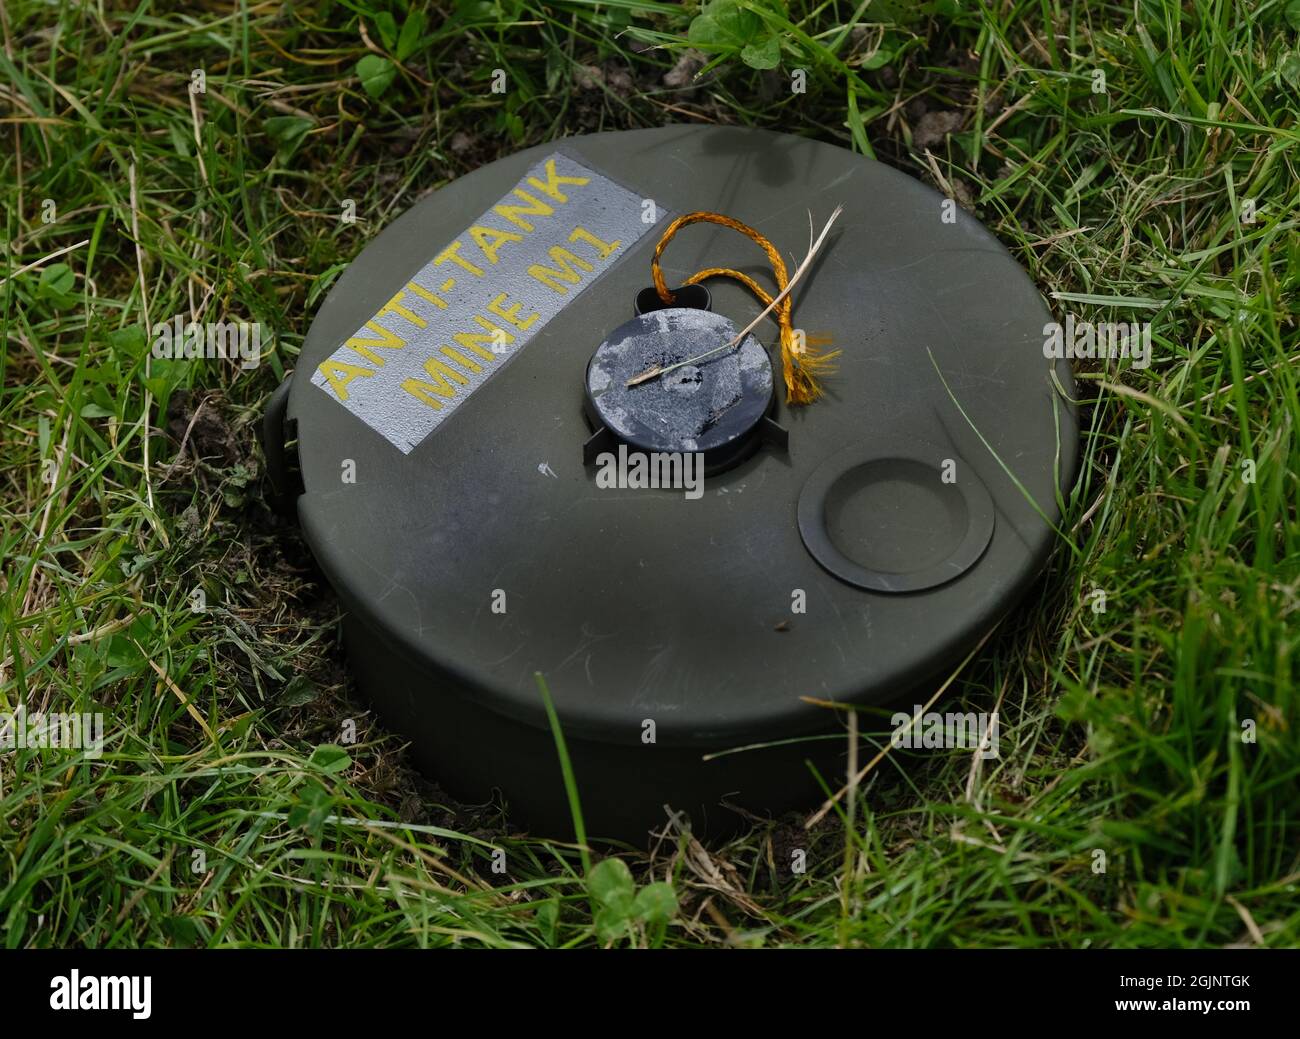 An anti-tank mine (abbreviated to 'AT mine') is a type of land mine designed to damage or destroy vehicles including tanks and armored fighting vehicl Stock Photo